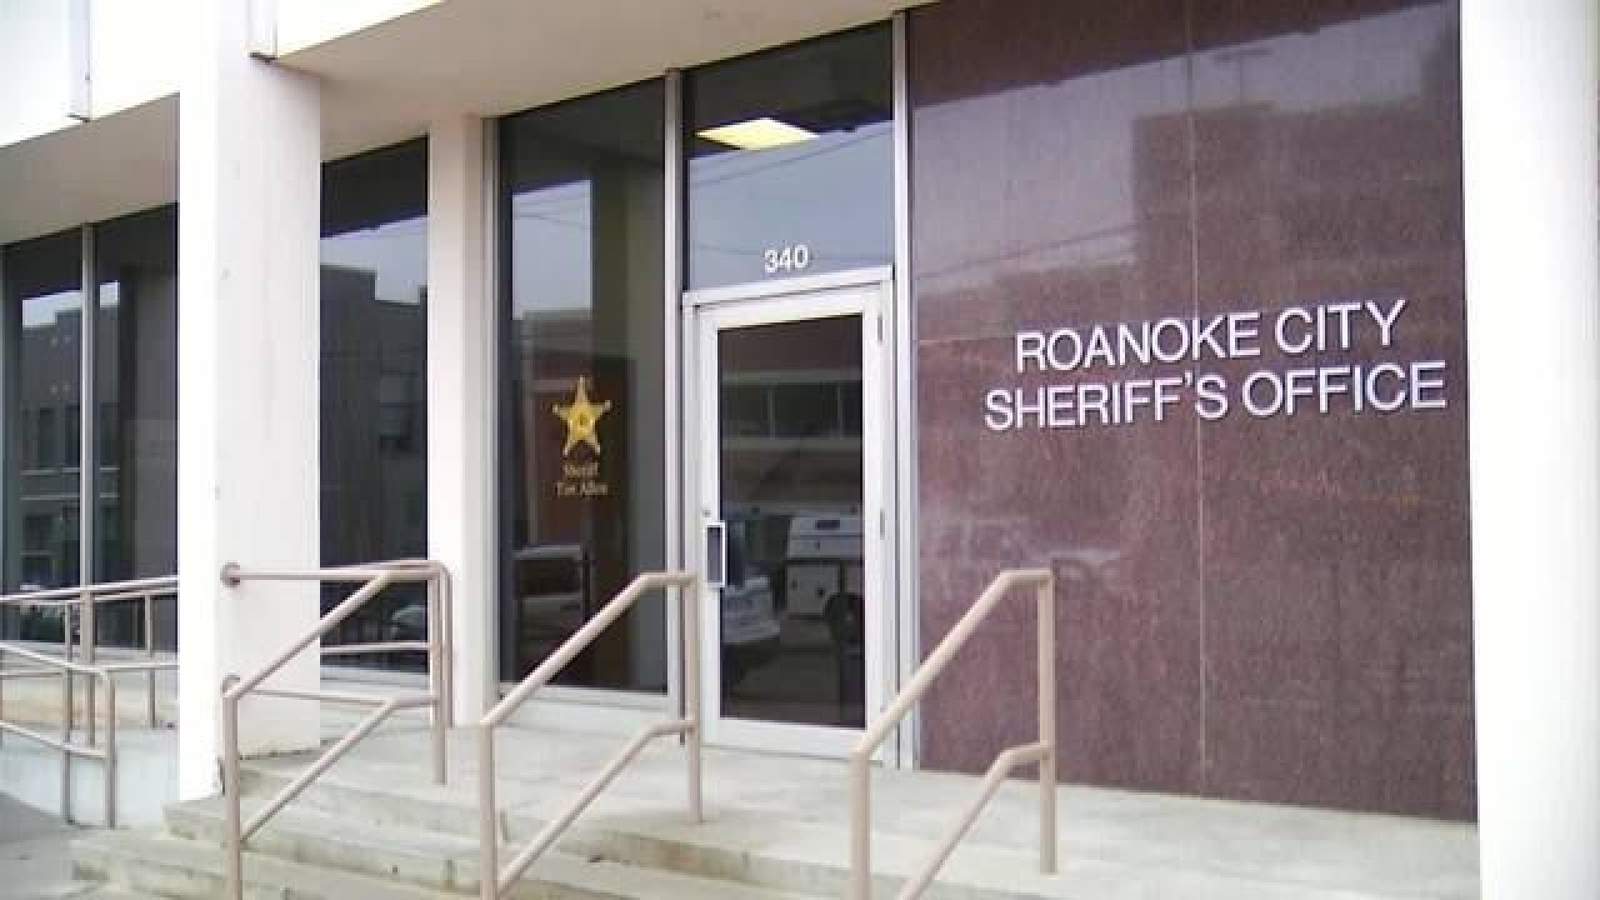 Nearly 70 staff, inmates from Roanoke Sheriff’s Office test positive for COVID-19